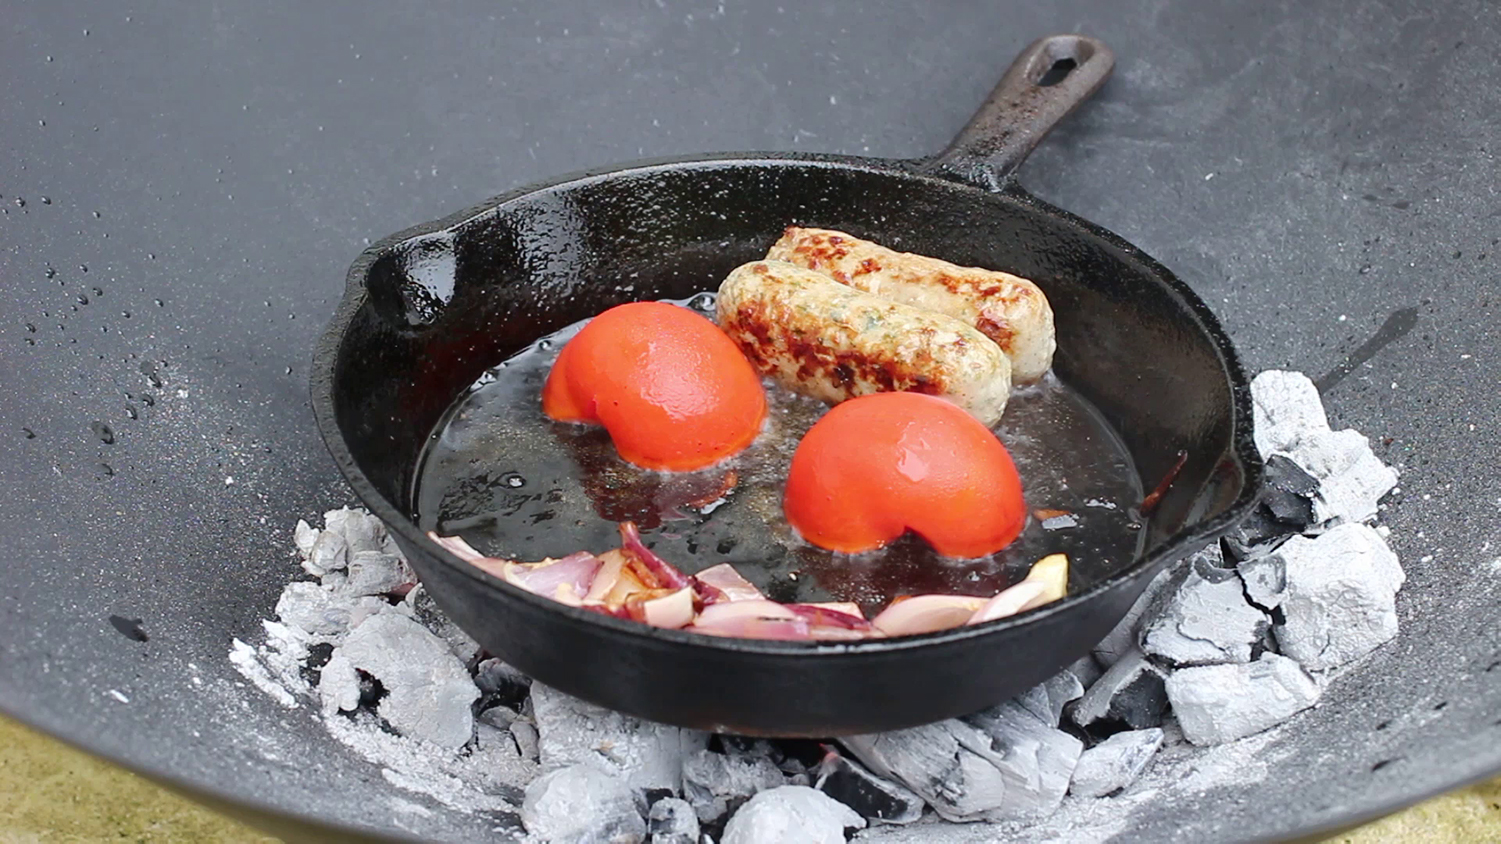 Tomatoes cooking for breakfast